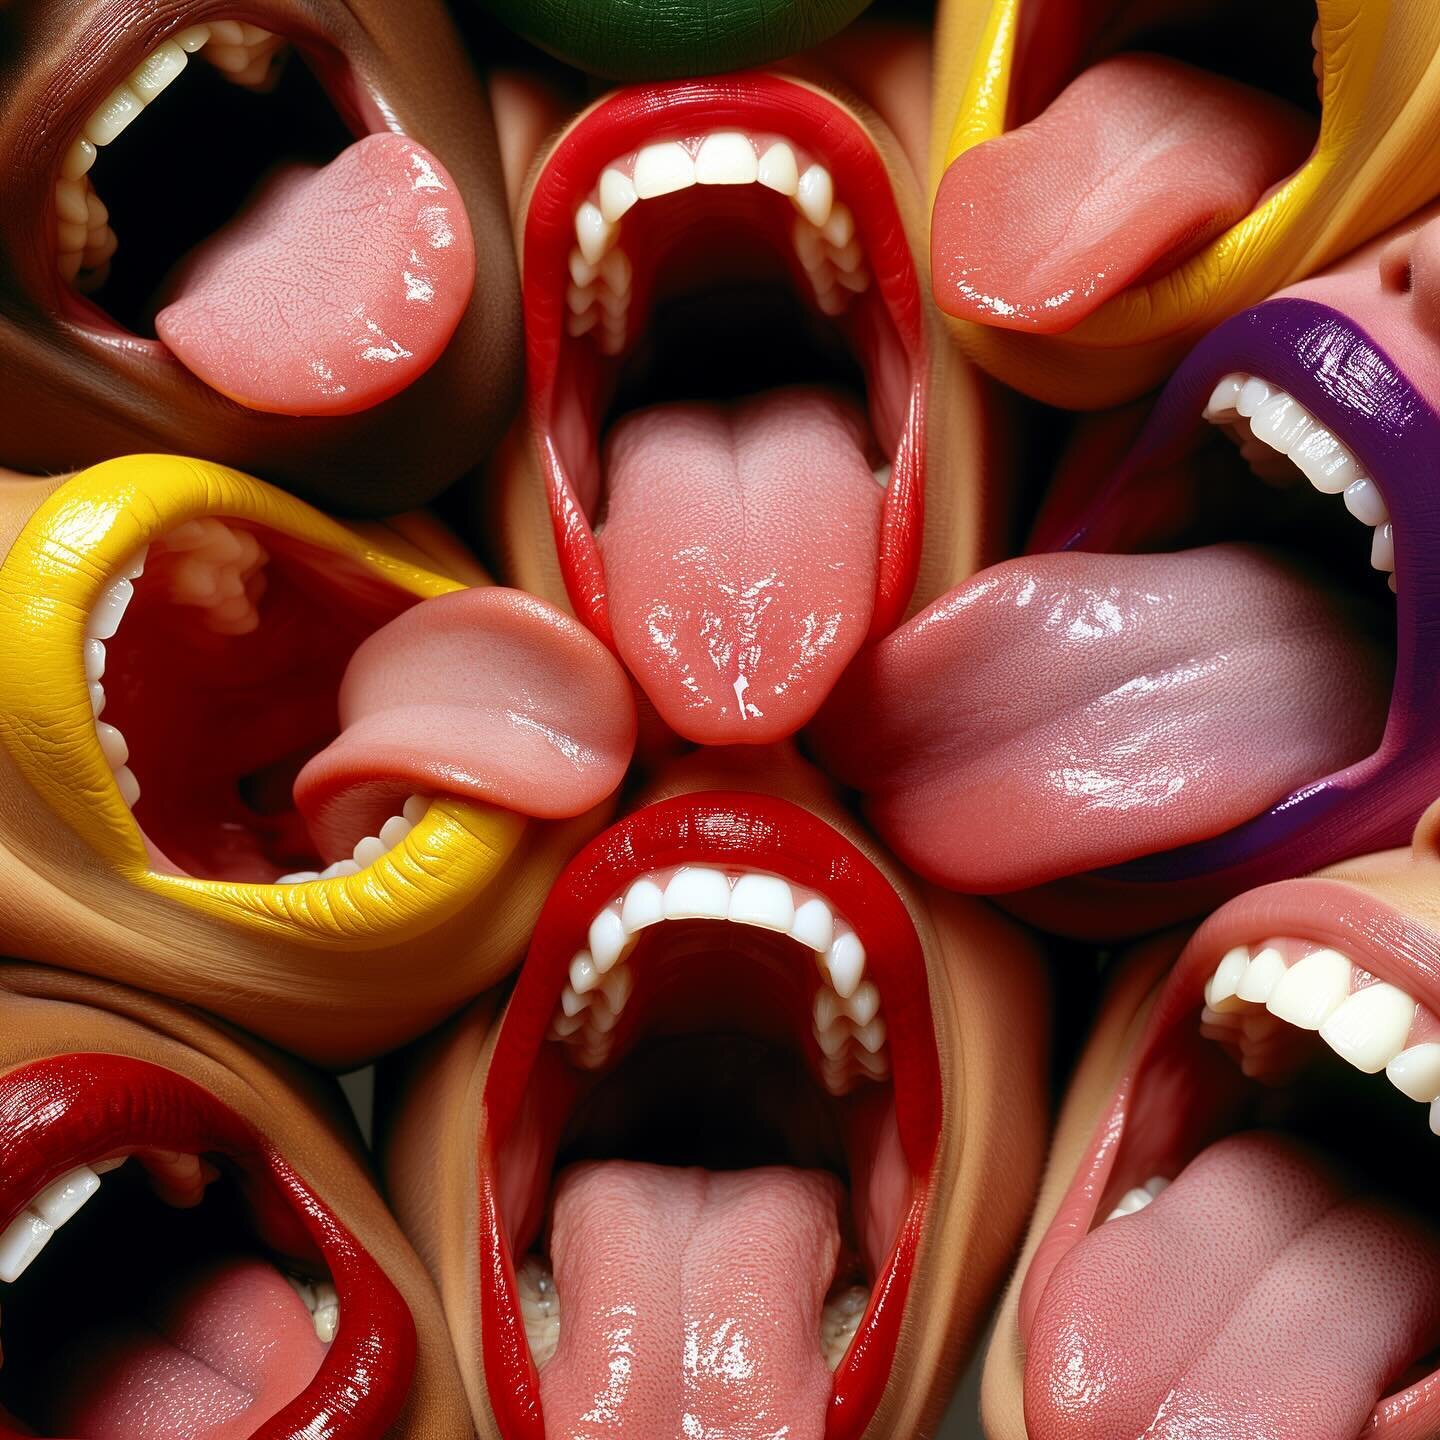 Thanks, I hate it.

Made with MidJourney v6

#aiart #aigeneratedart #generativeart #digitalart #art #aiartcommunity #midjourney #midjourneyai #midjourneyv6 #thanksihateit #tihi #mouths #tongues #gross #rollingstones